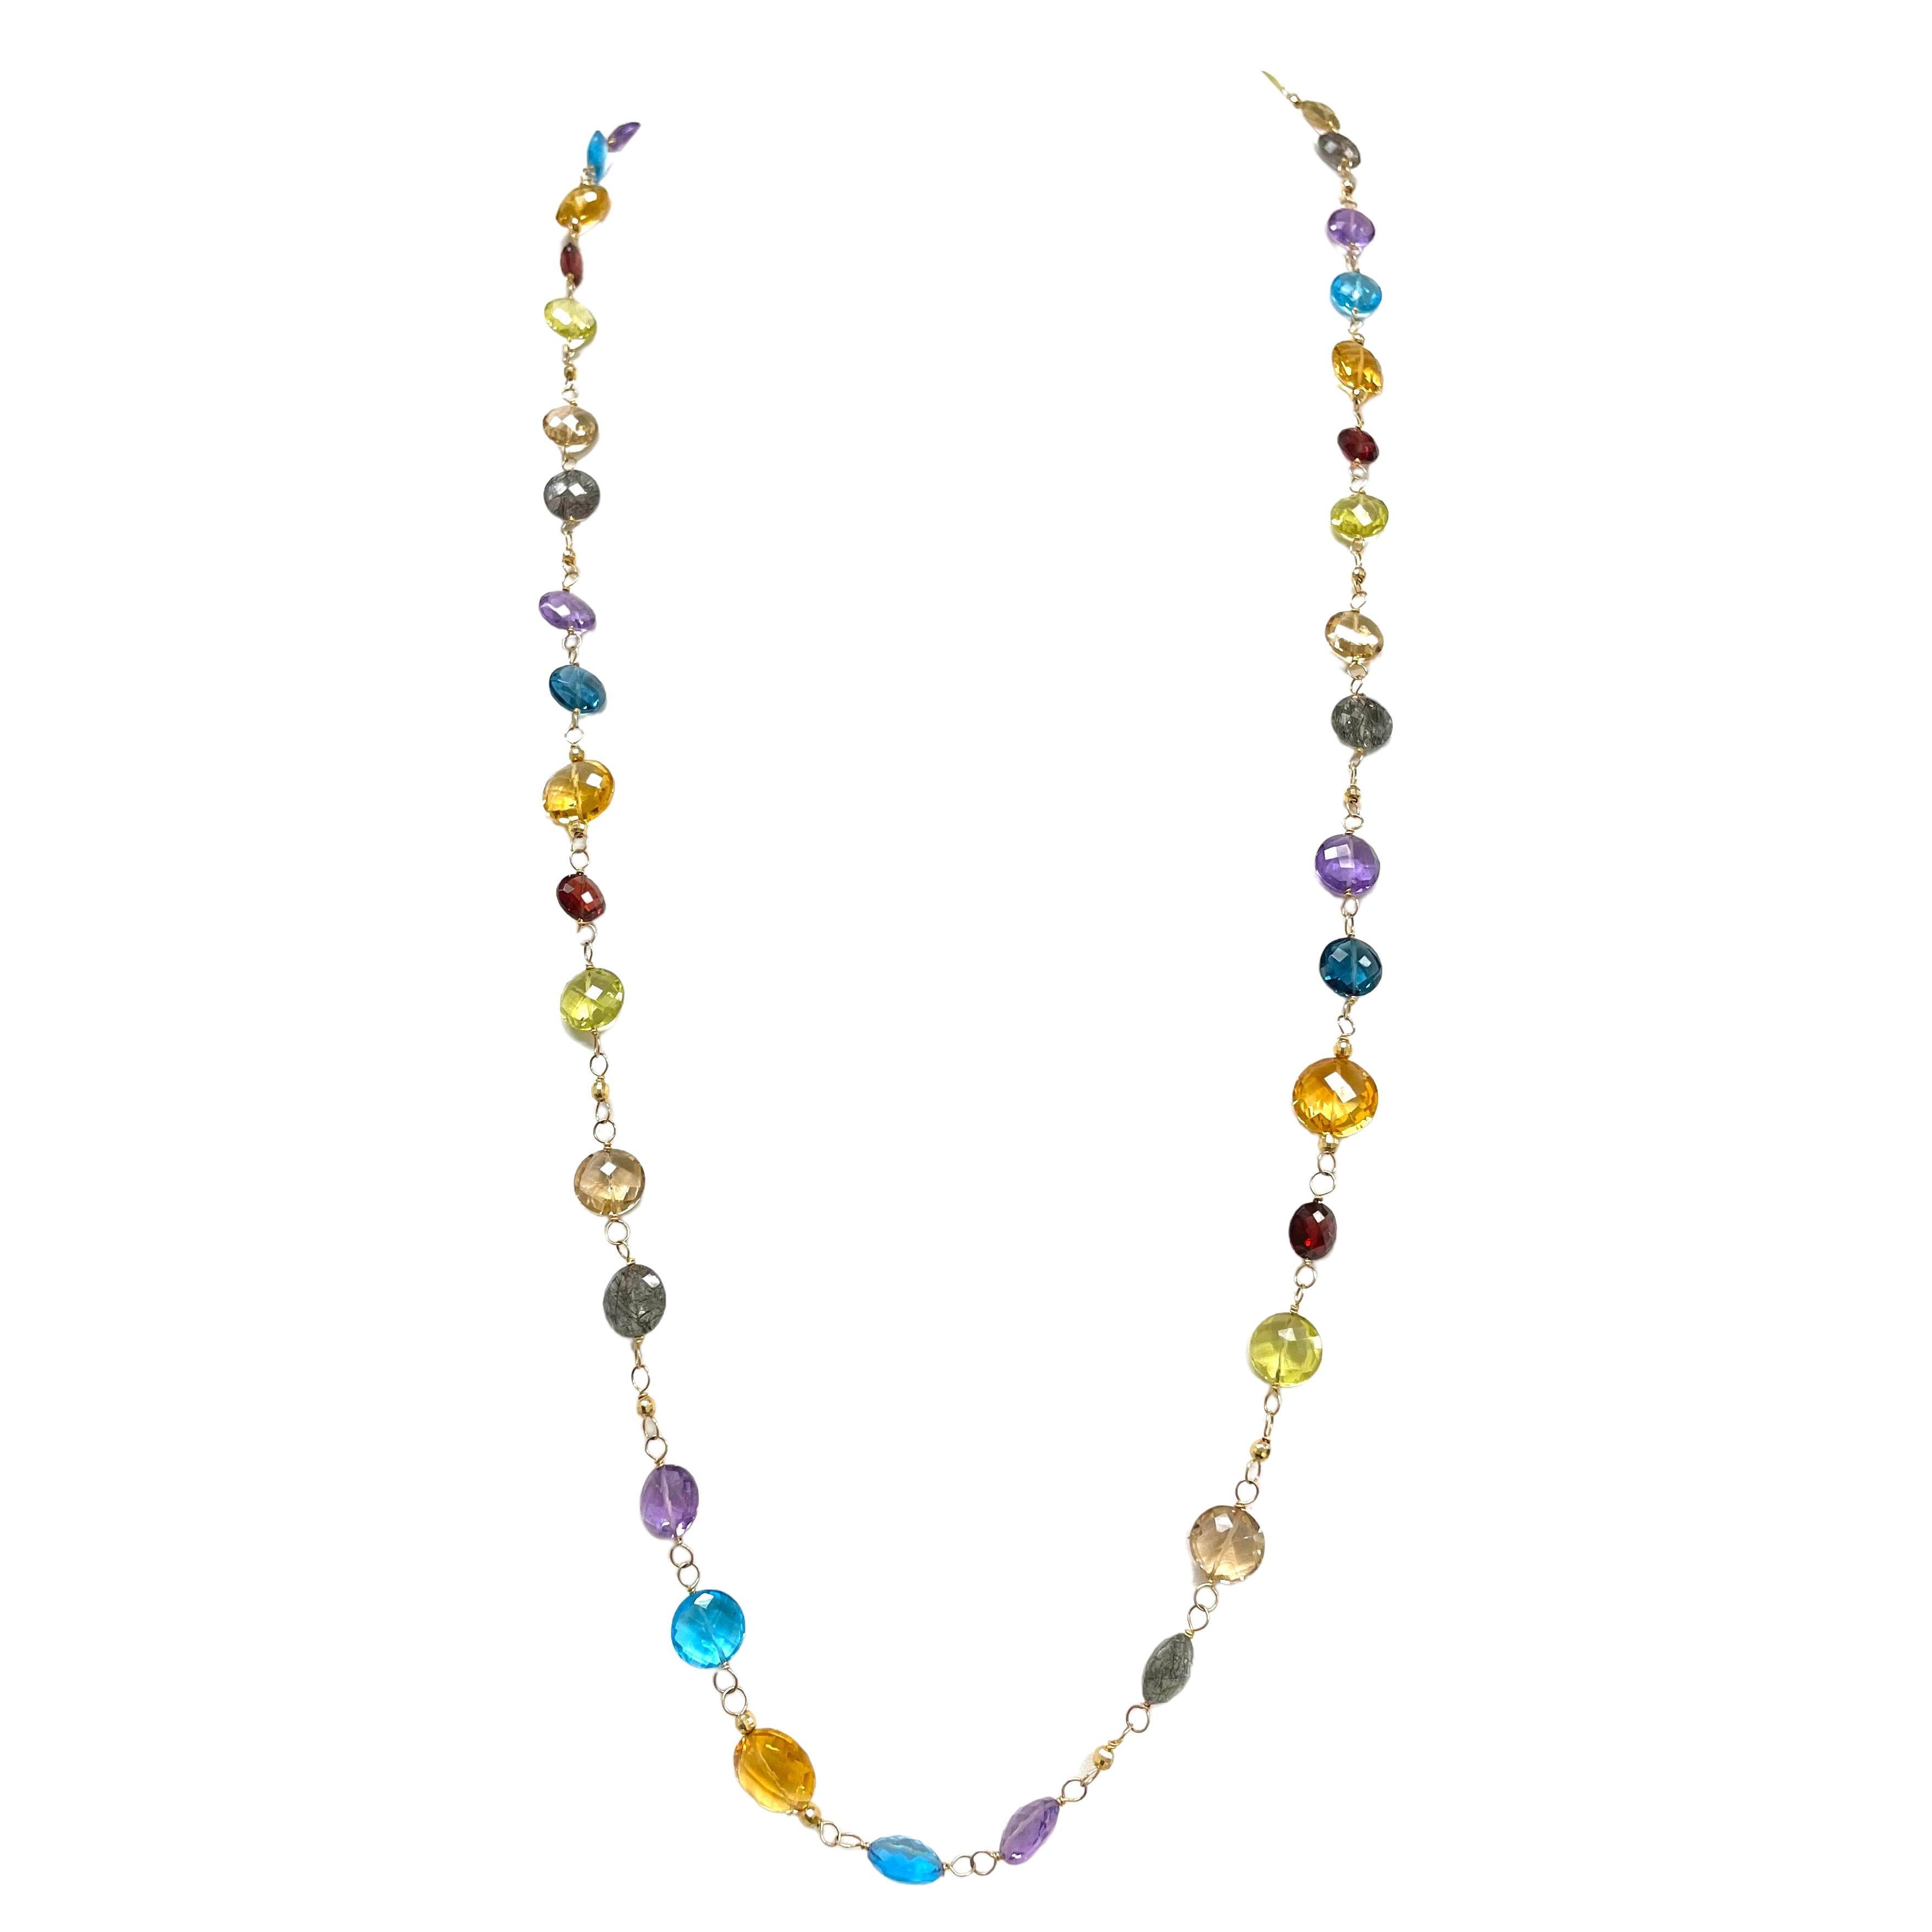 Description
Stunning colorful mix of semi-precious gemstones composed of Swiss and London Blue Topaz, Amethyst, Citrine, Garnet and Lemon Quartz designed to exude joy and harmony. The necklace is accented with 14k yellow gold faceted balls to add